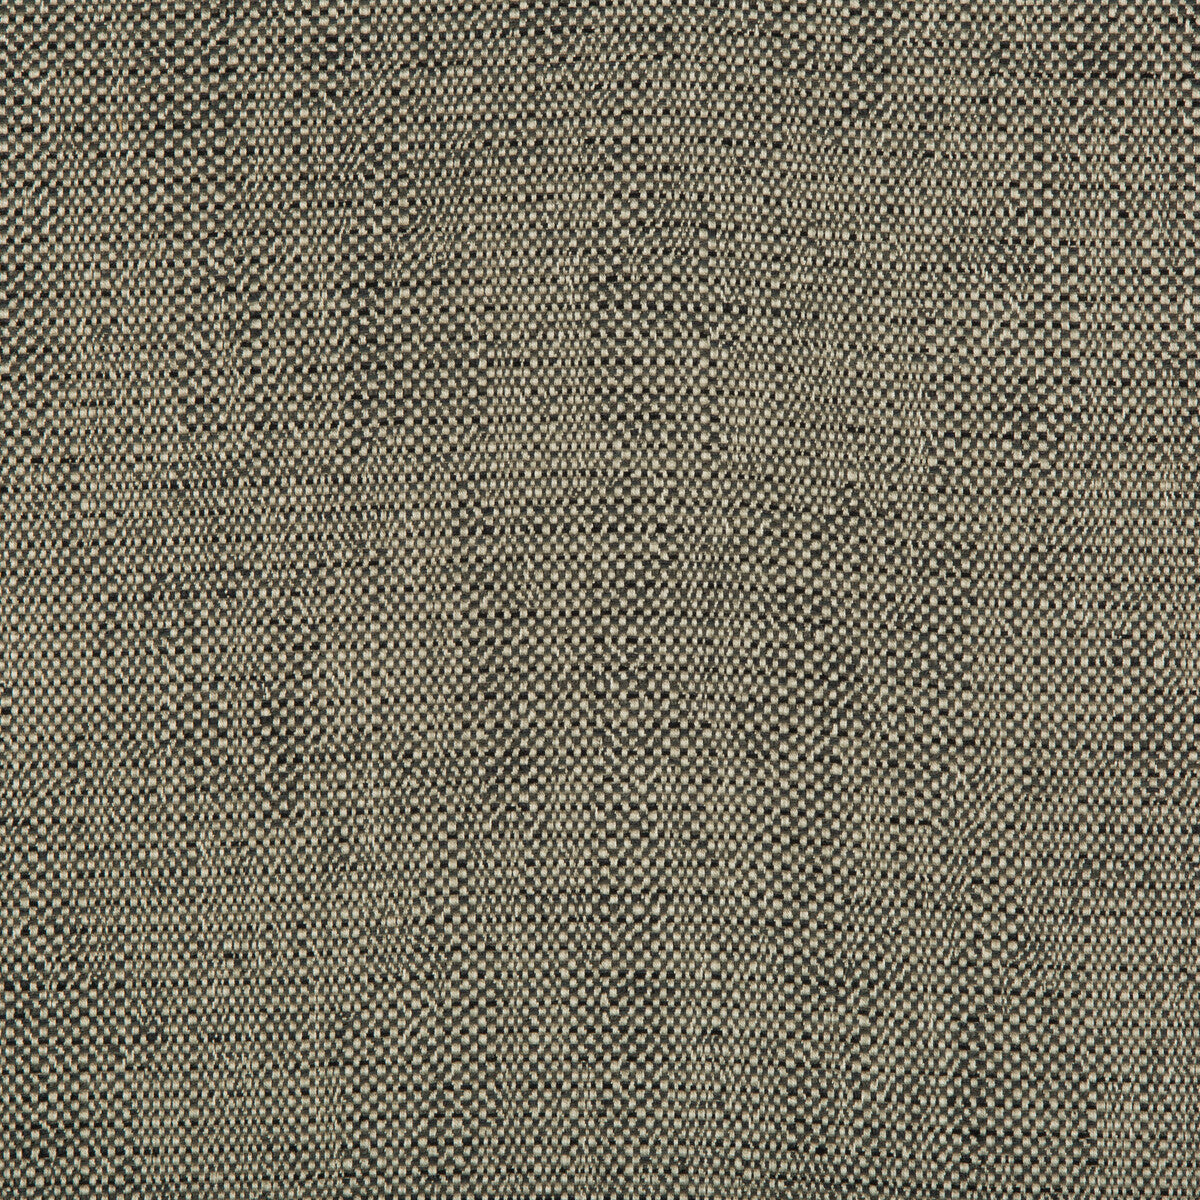 Kravet Design fabric in 35135-21 color - pattern 35135.21.0 - by Kravet Design in the Performance Crypton Home collection